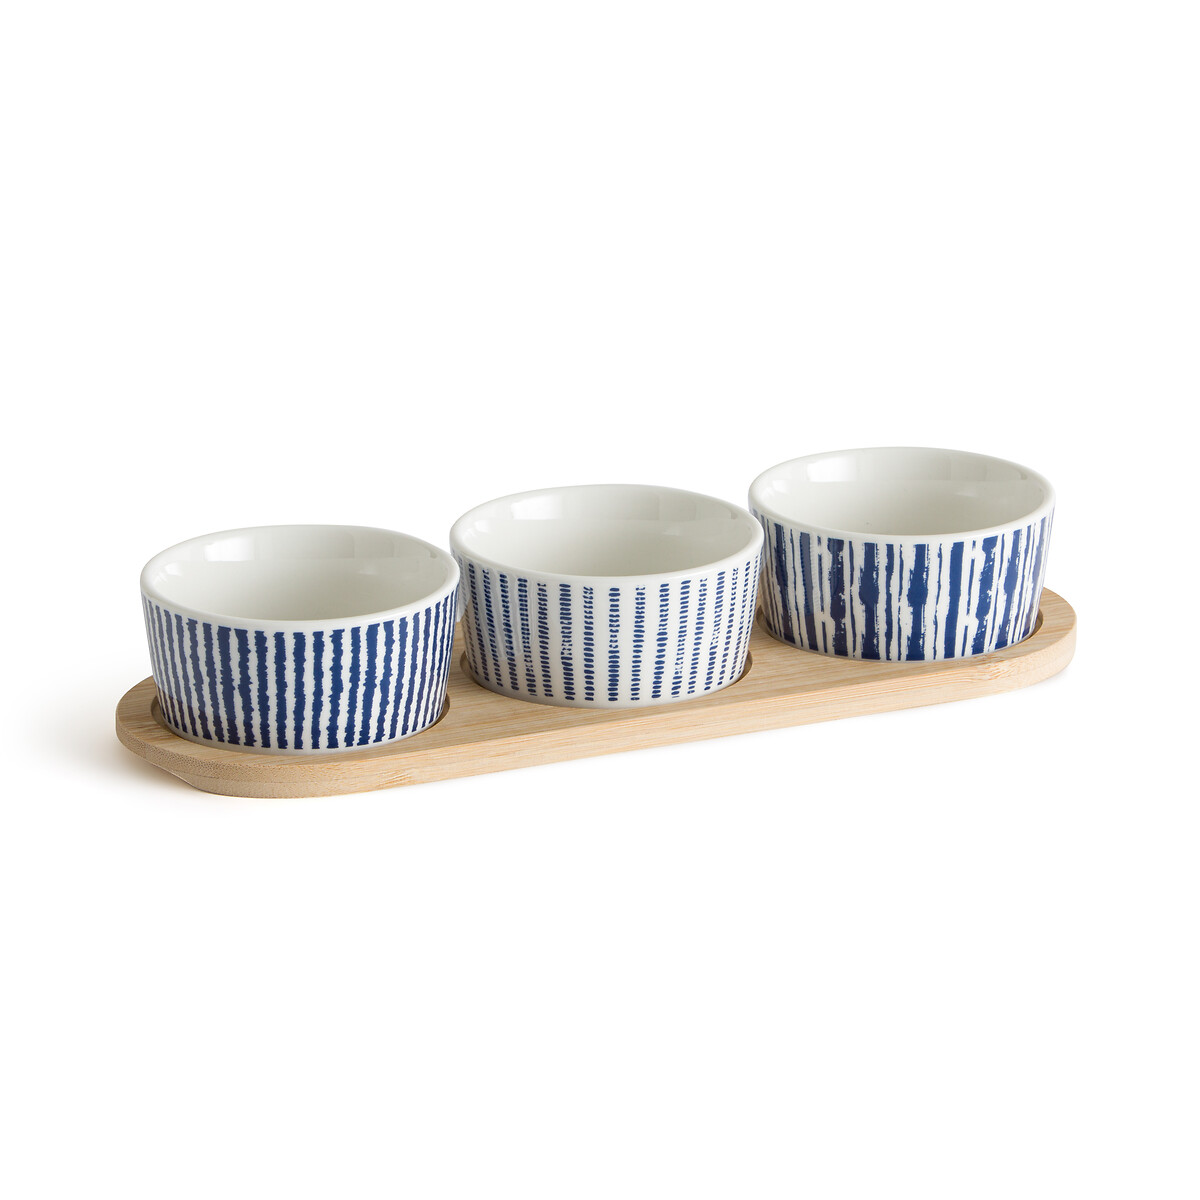 Set of 3 Atlanti Porcelain Cups on Bamboo Tray